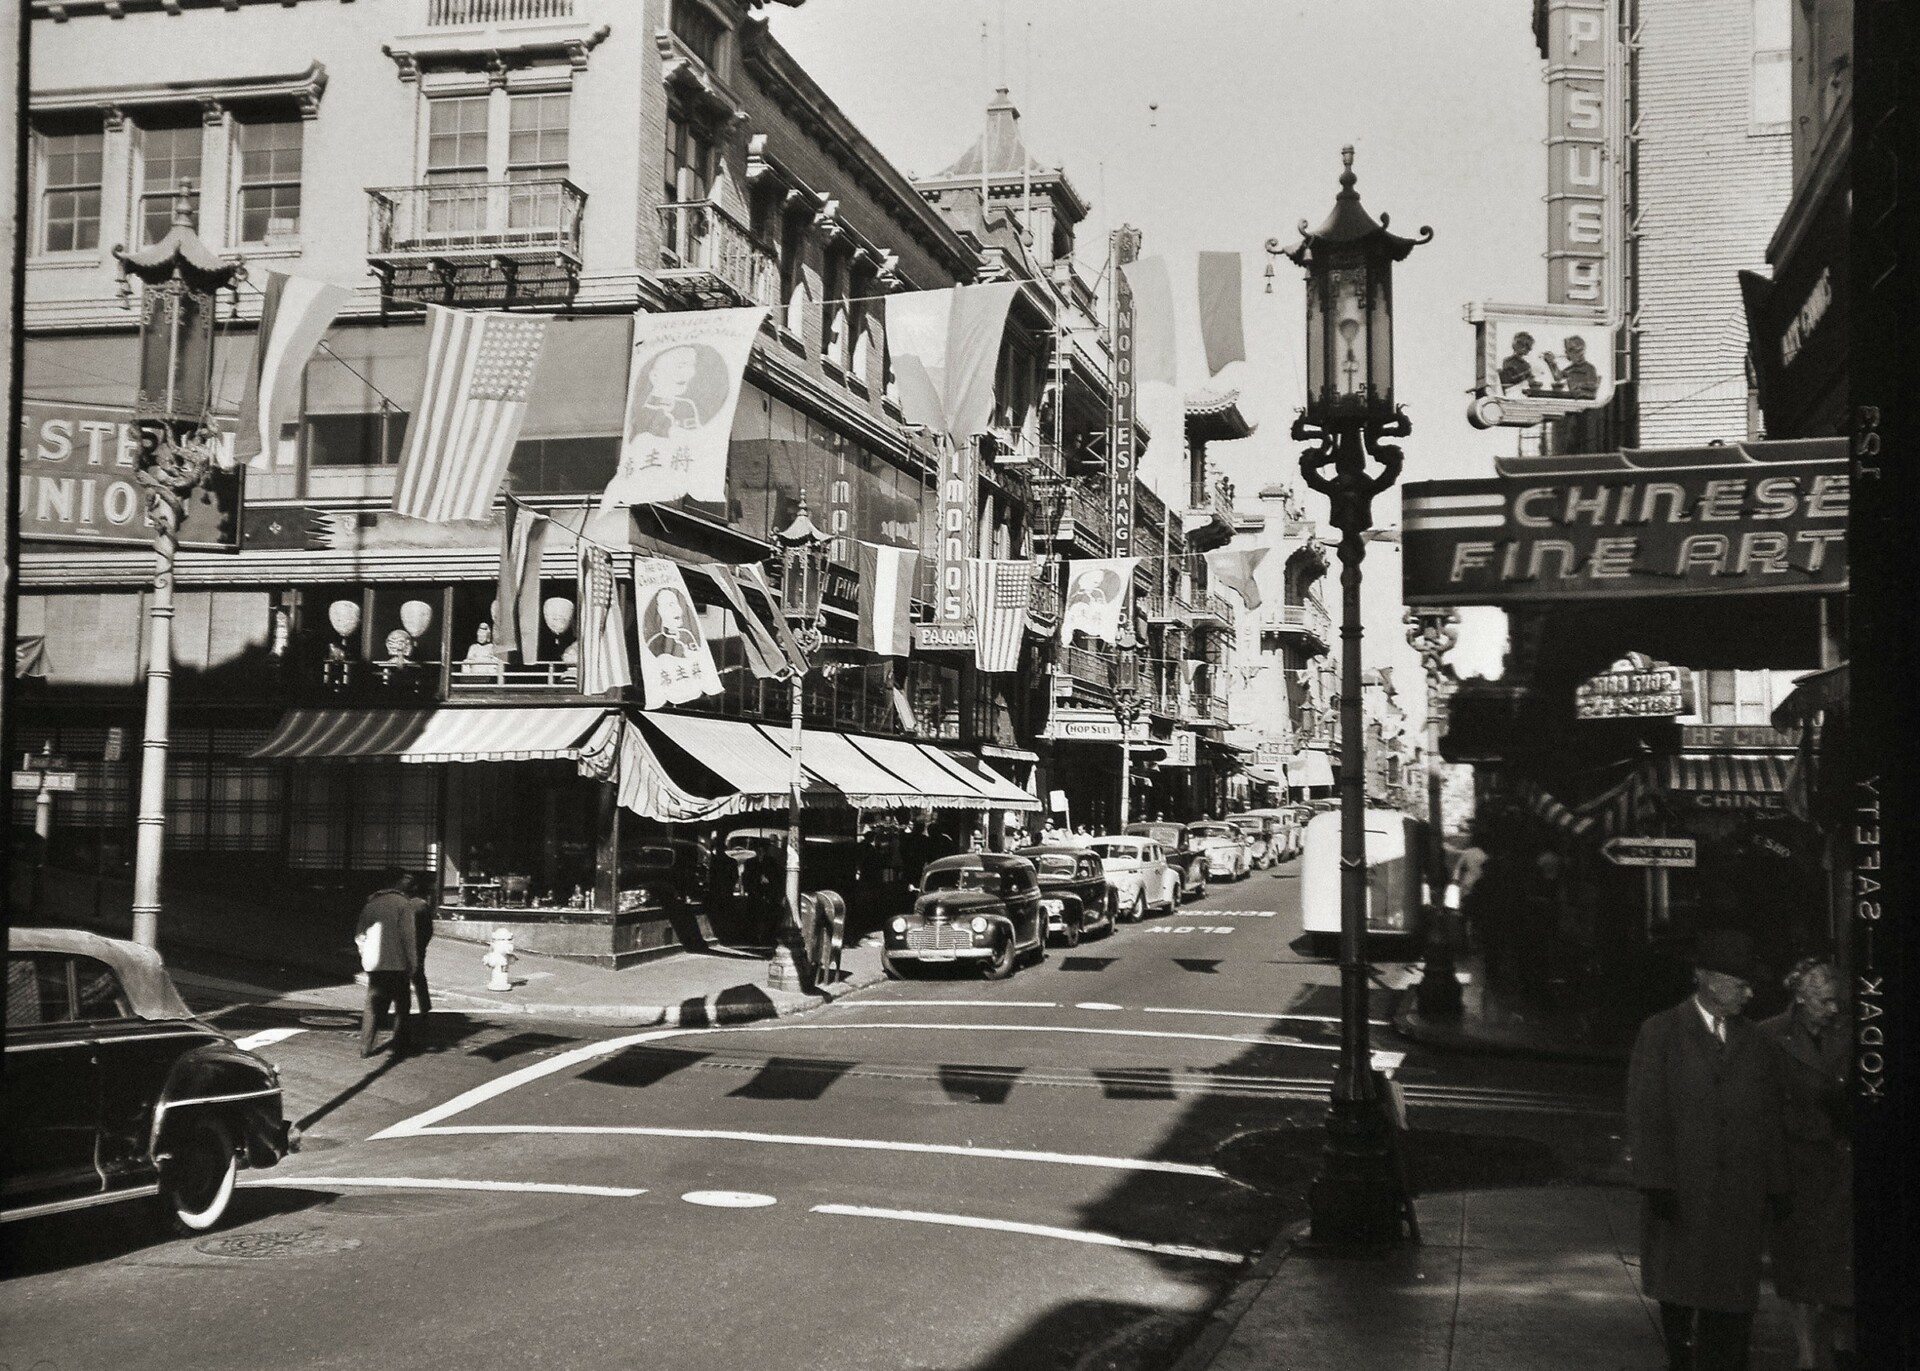 Black and white landscape photo of a street in San Francisco's Chinatown.